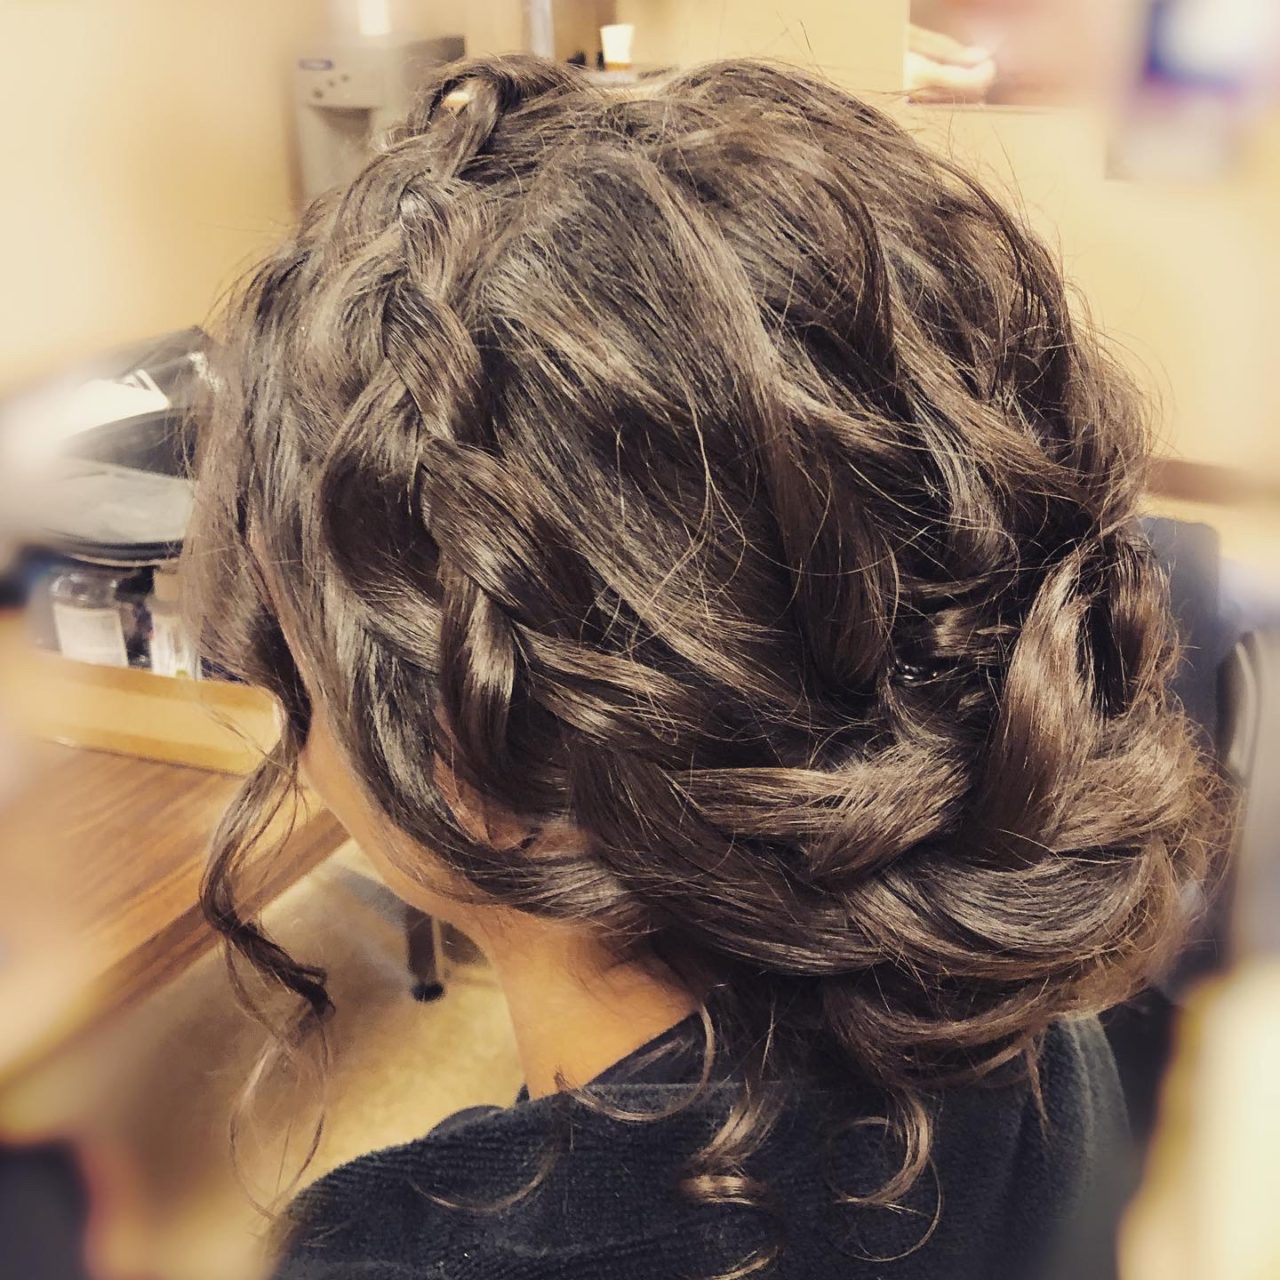 Side back look of a wedding low updo hair. The wave and braid perfectly blend into the knot.